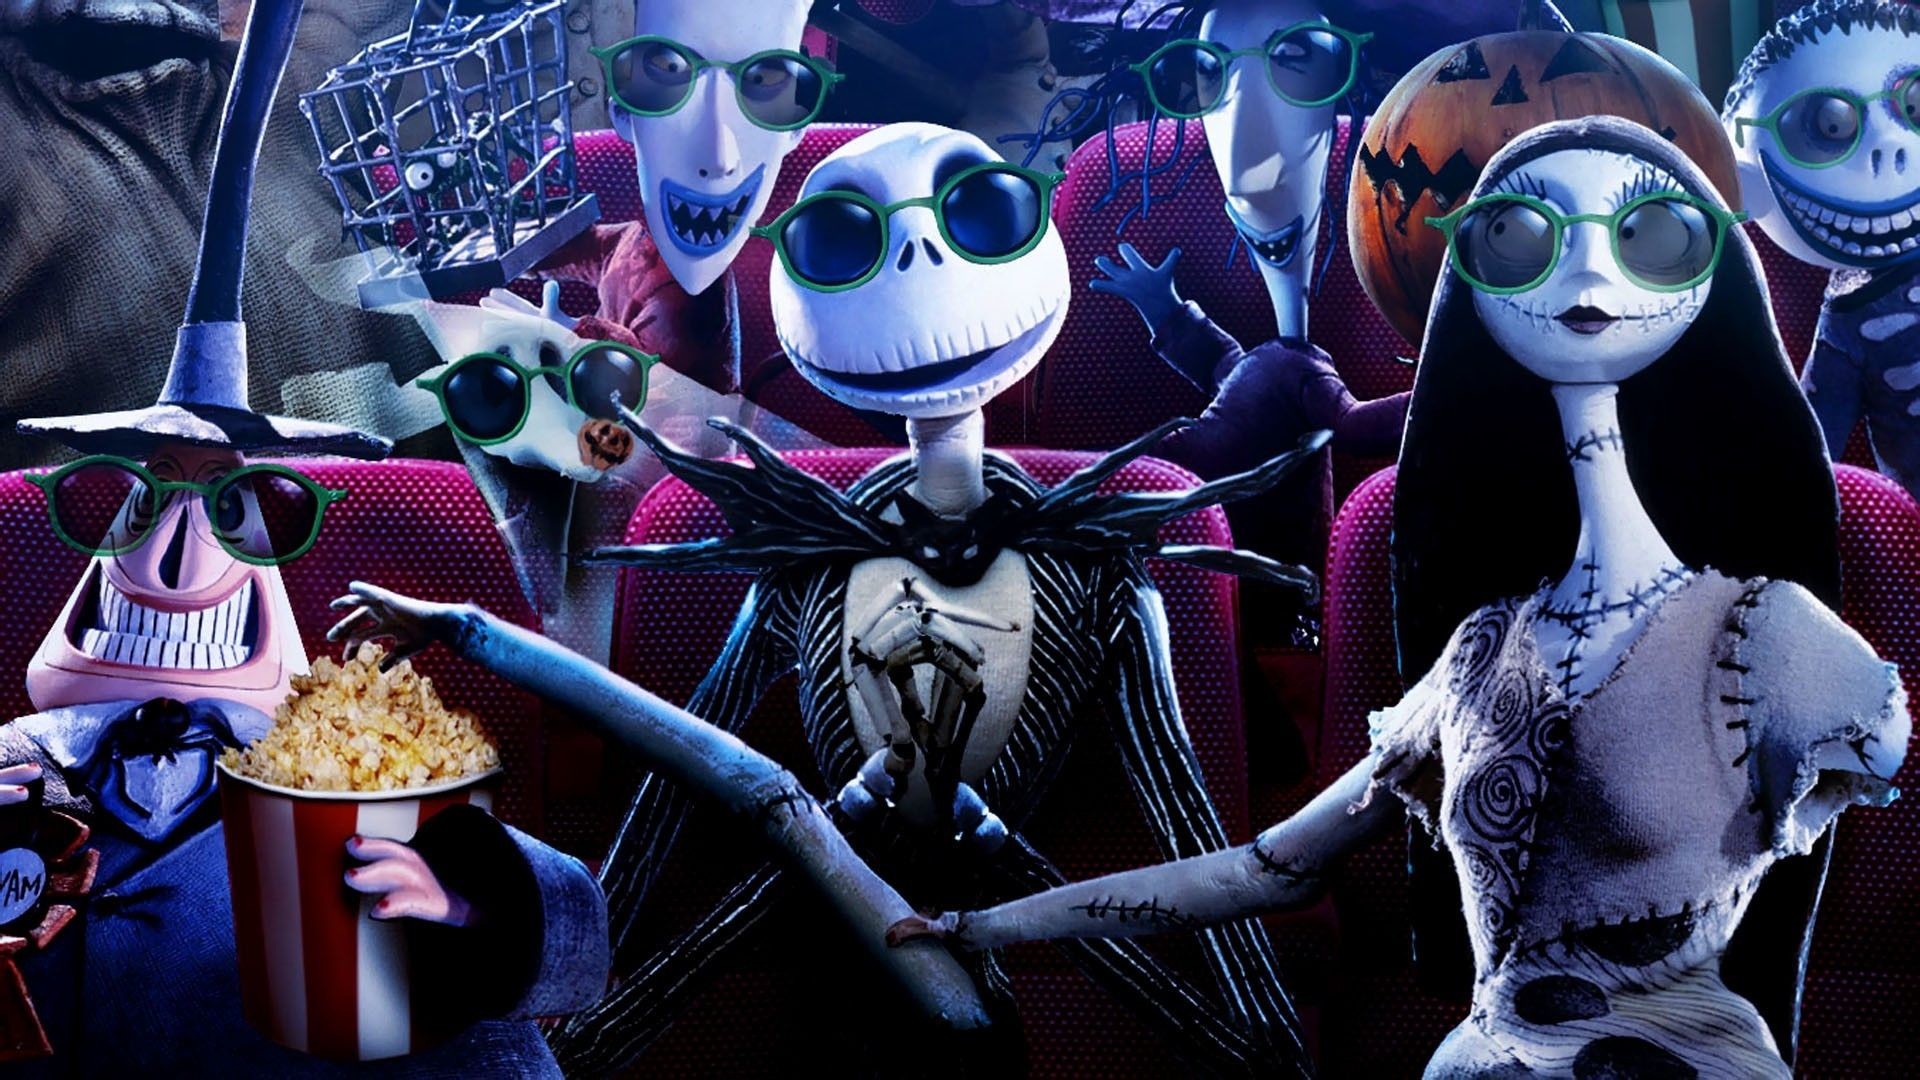 1920x1080 Nightmare Before Christmas Wallpapers HD - Wallpaper Cave